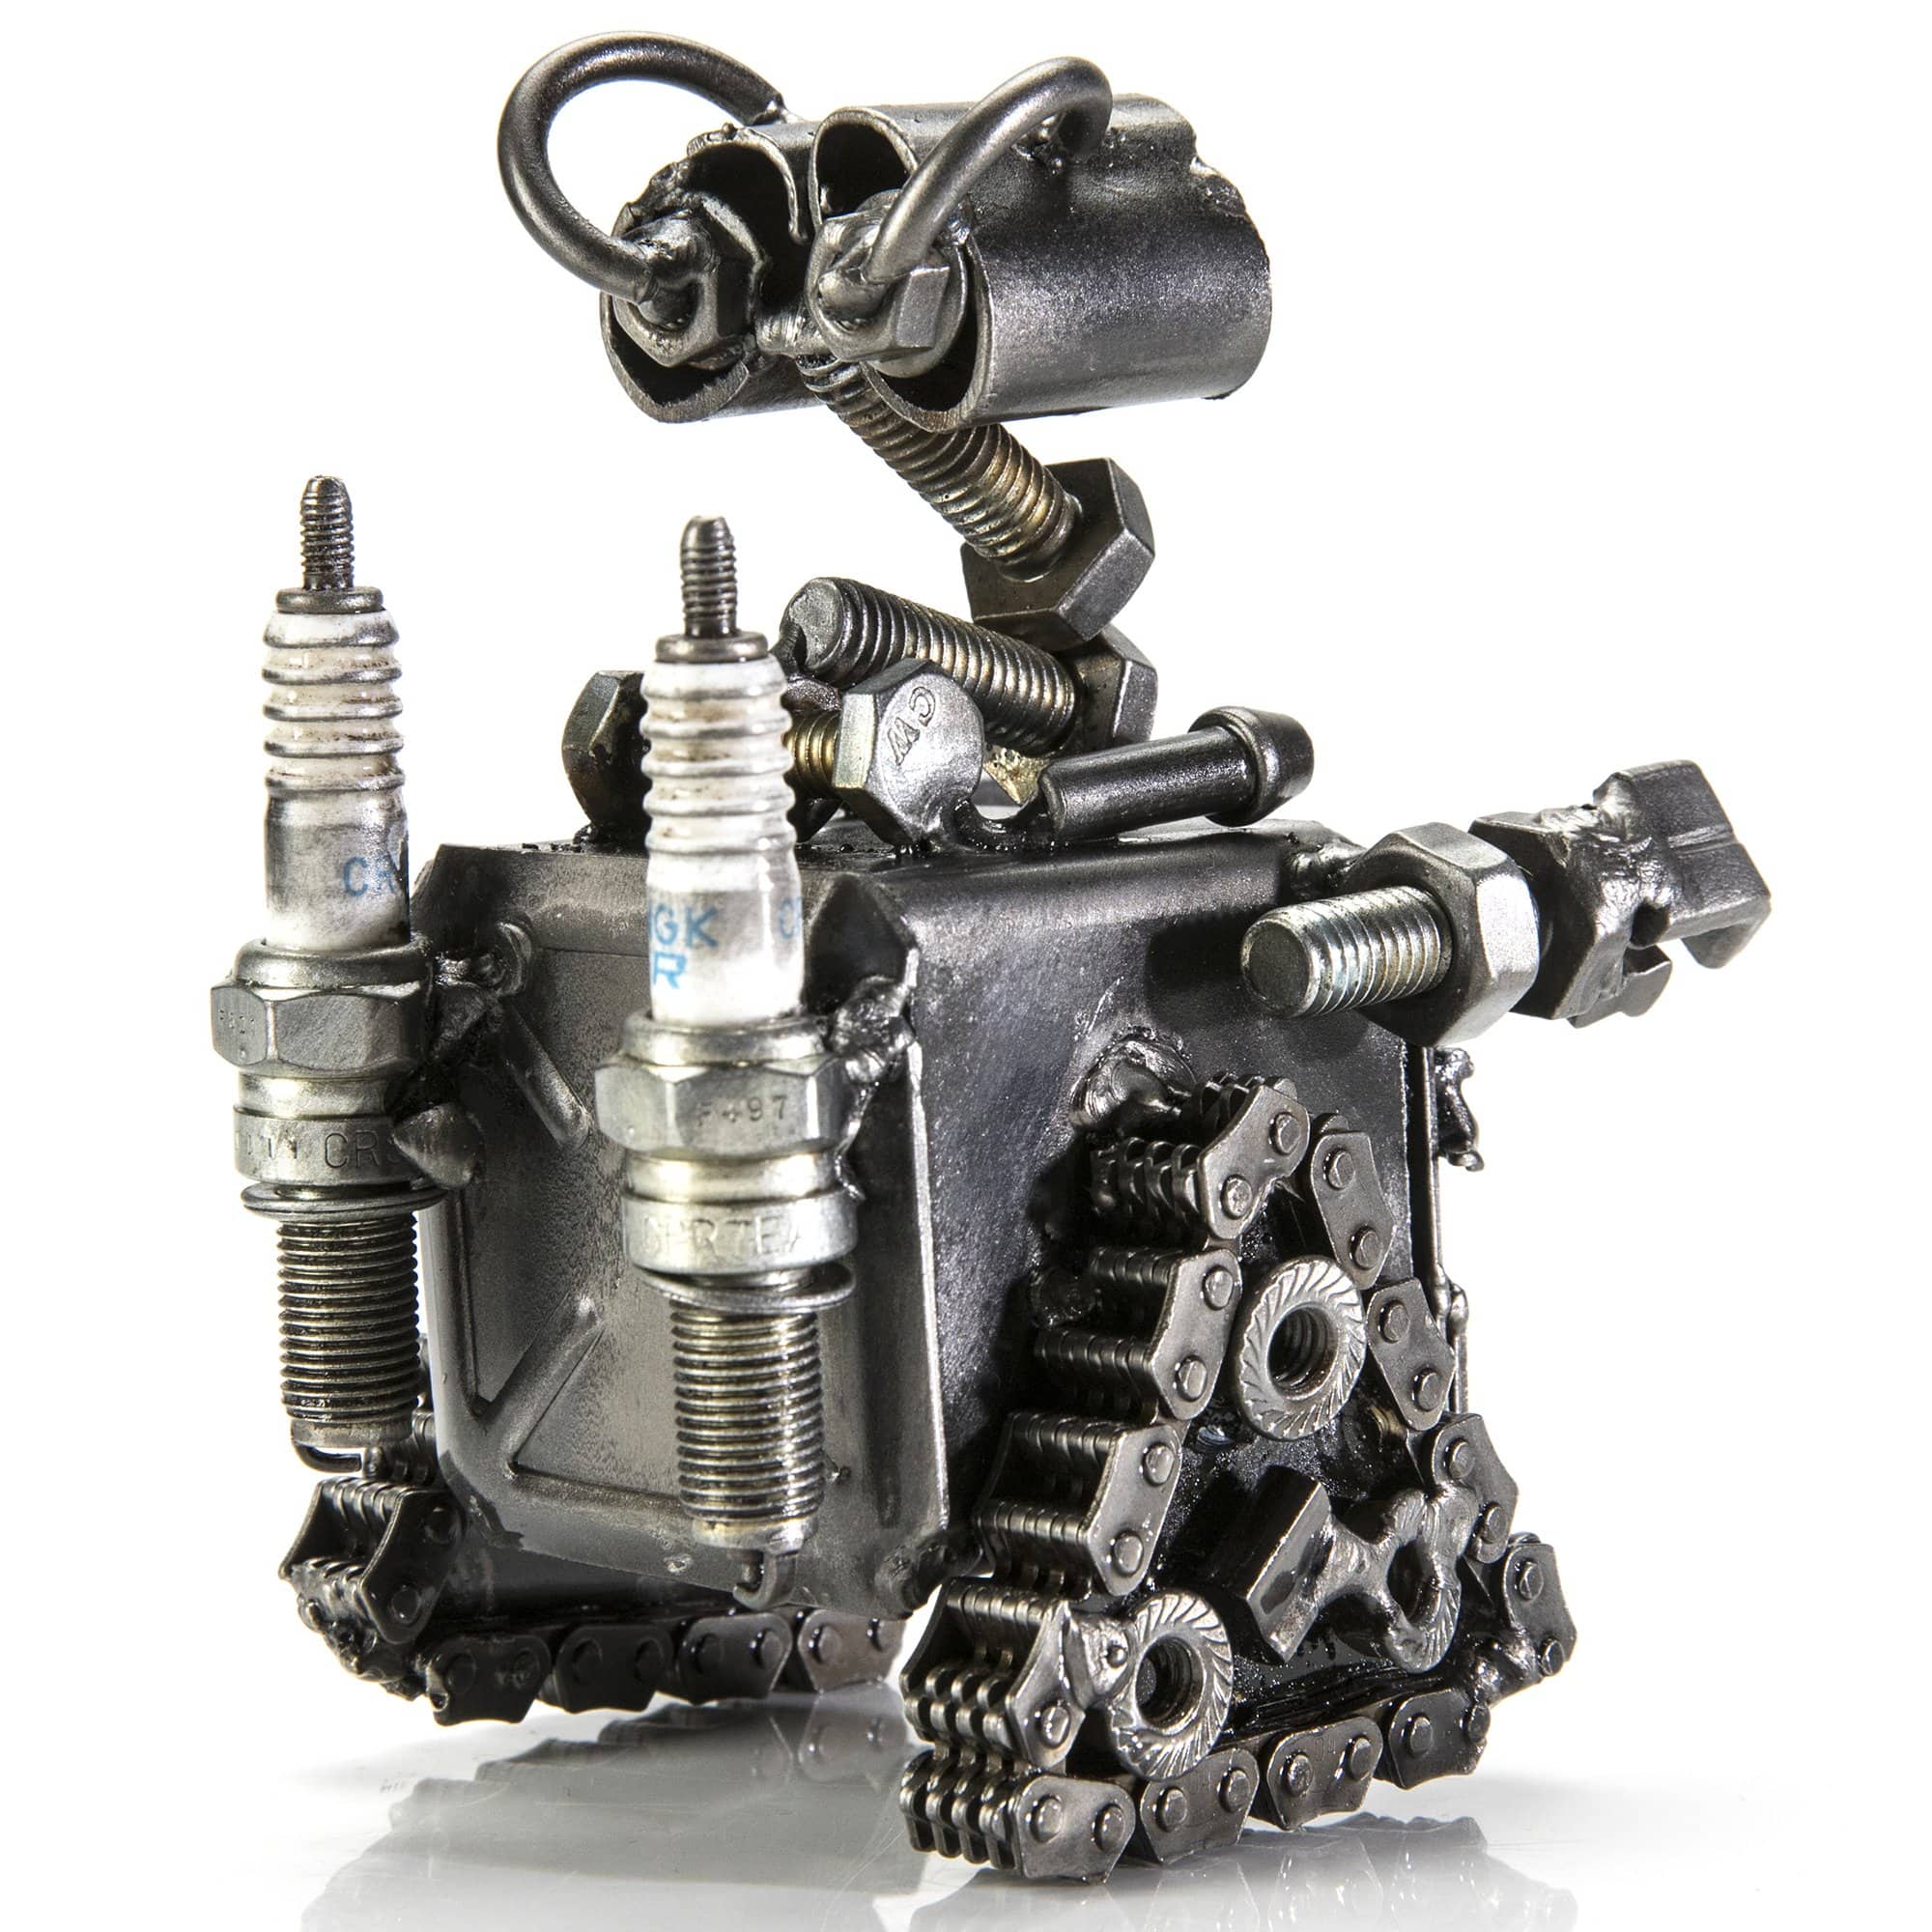 Kalifano Recycled Metal Art Wall-E Inspired Recycled Metal Sculpture RMS-280WE-S